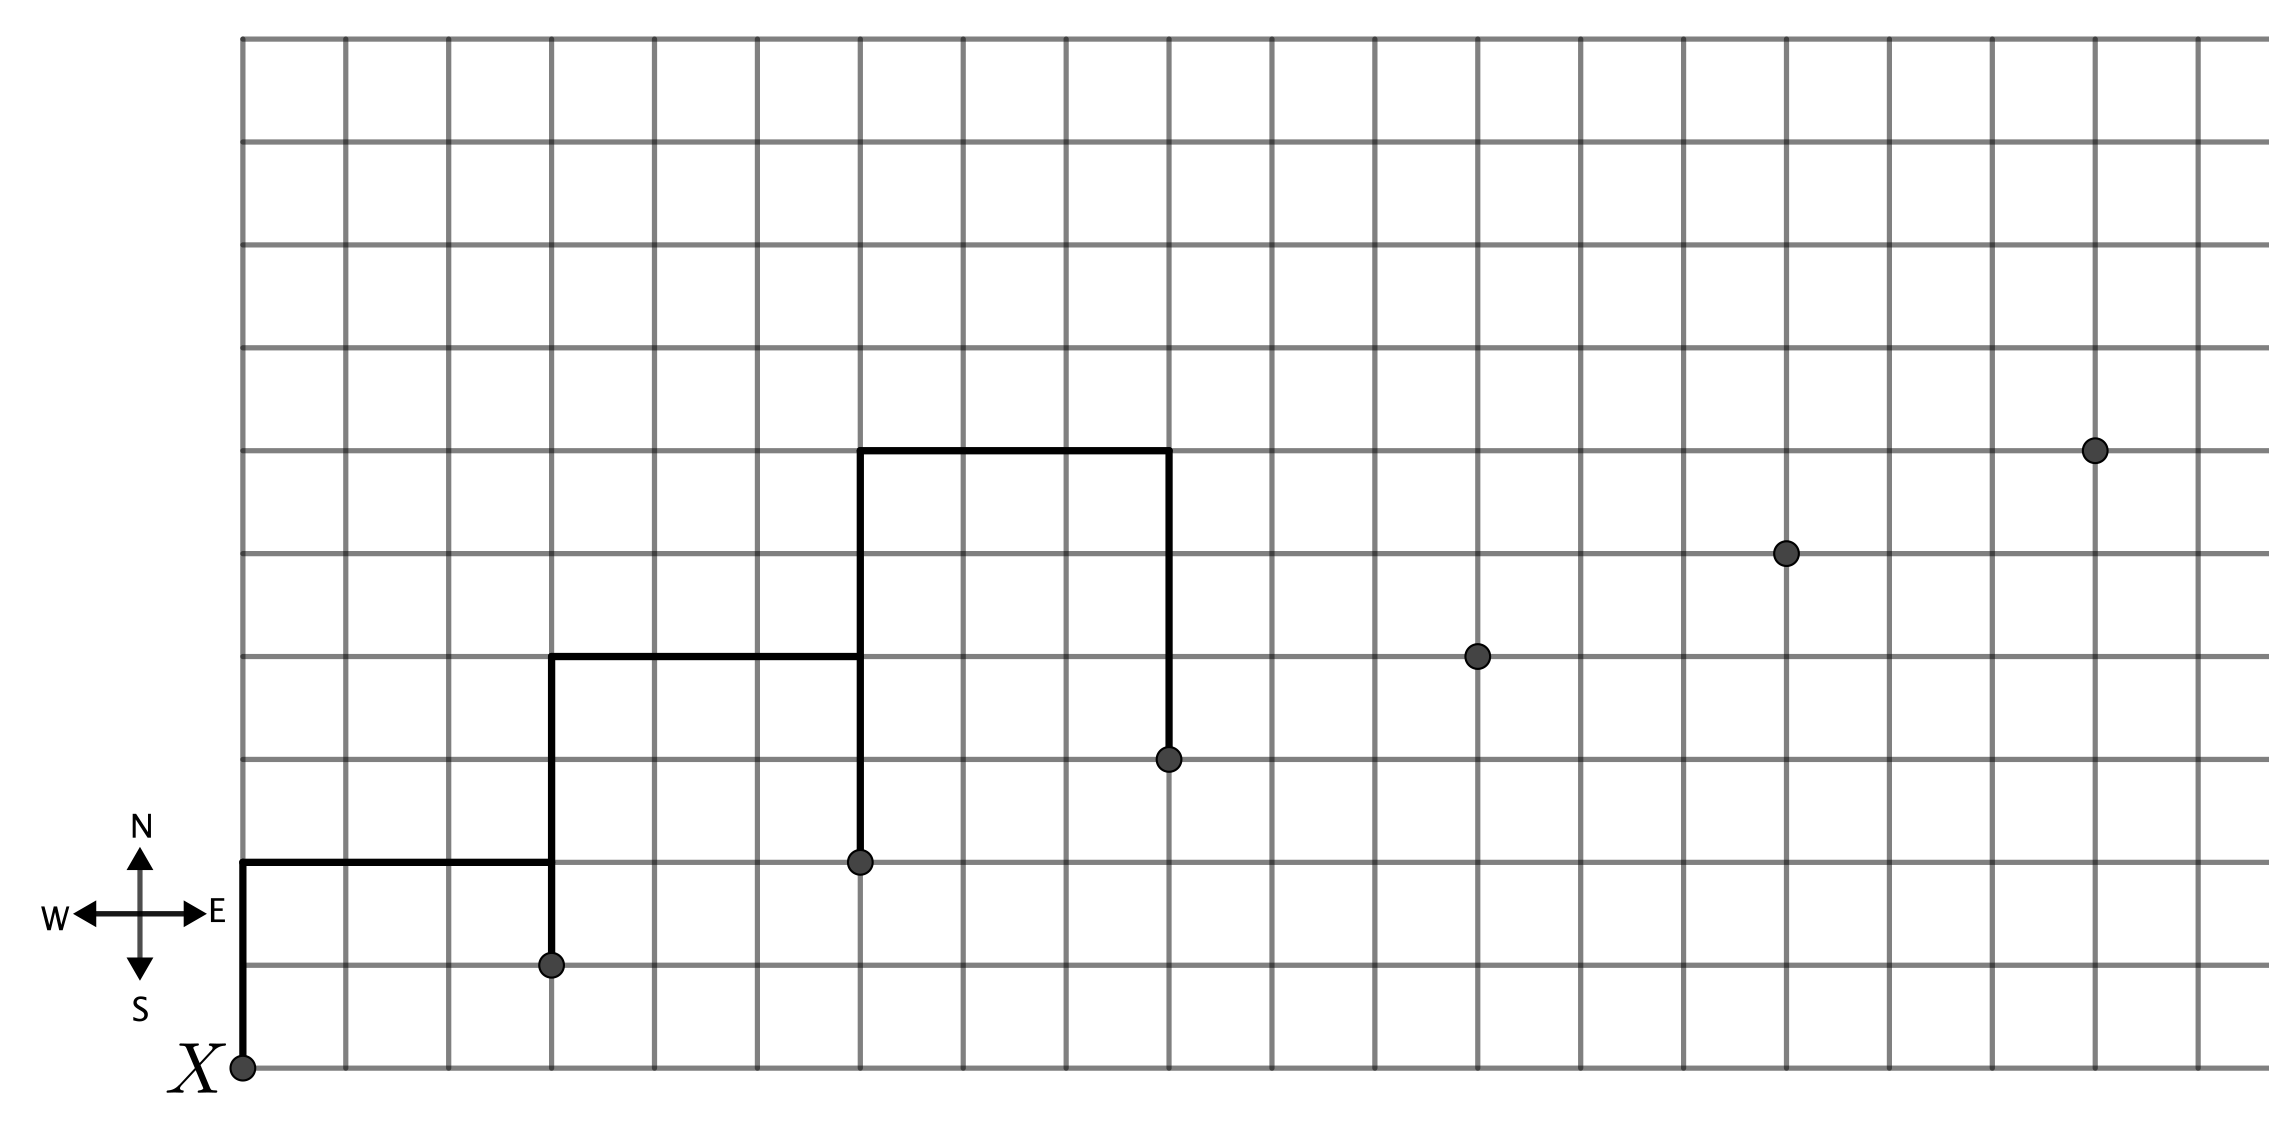 The path starts at X in the bottom left corner of the grid. The path goes up 2, right 3, down 1, then the path continues 3 up, 3 right, 2 down, and then 4 up, 3 right, 3 down. Six points are plotted at the following locations: 3 to the right and 1 up from X, 6 right and 2 up from X, 9 right and 3 up from X, twelve right and 4 up from X, fifteen right and 5 up from X, eighteen right and 6 up from X.